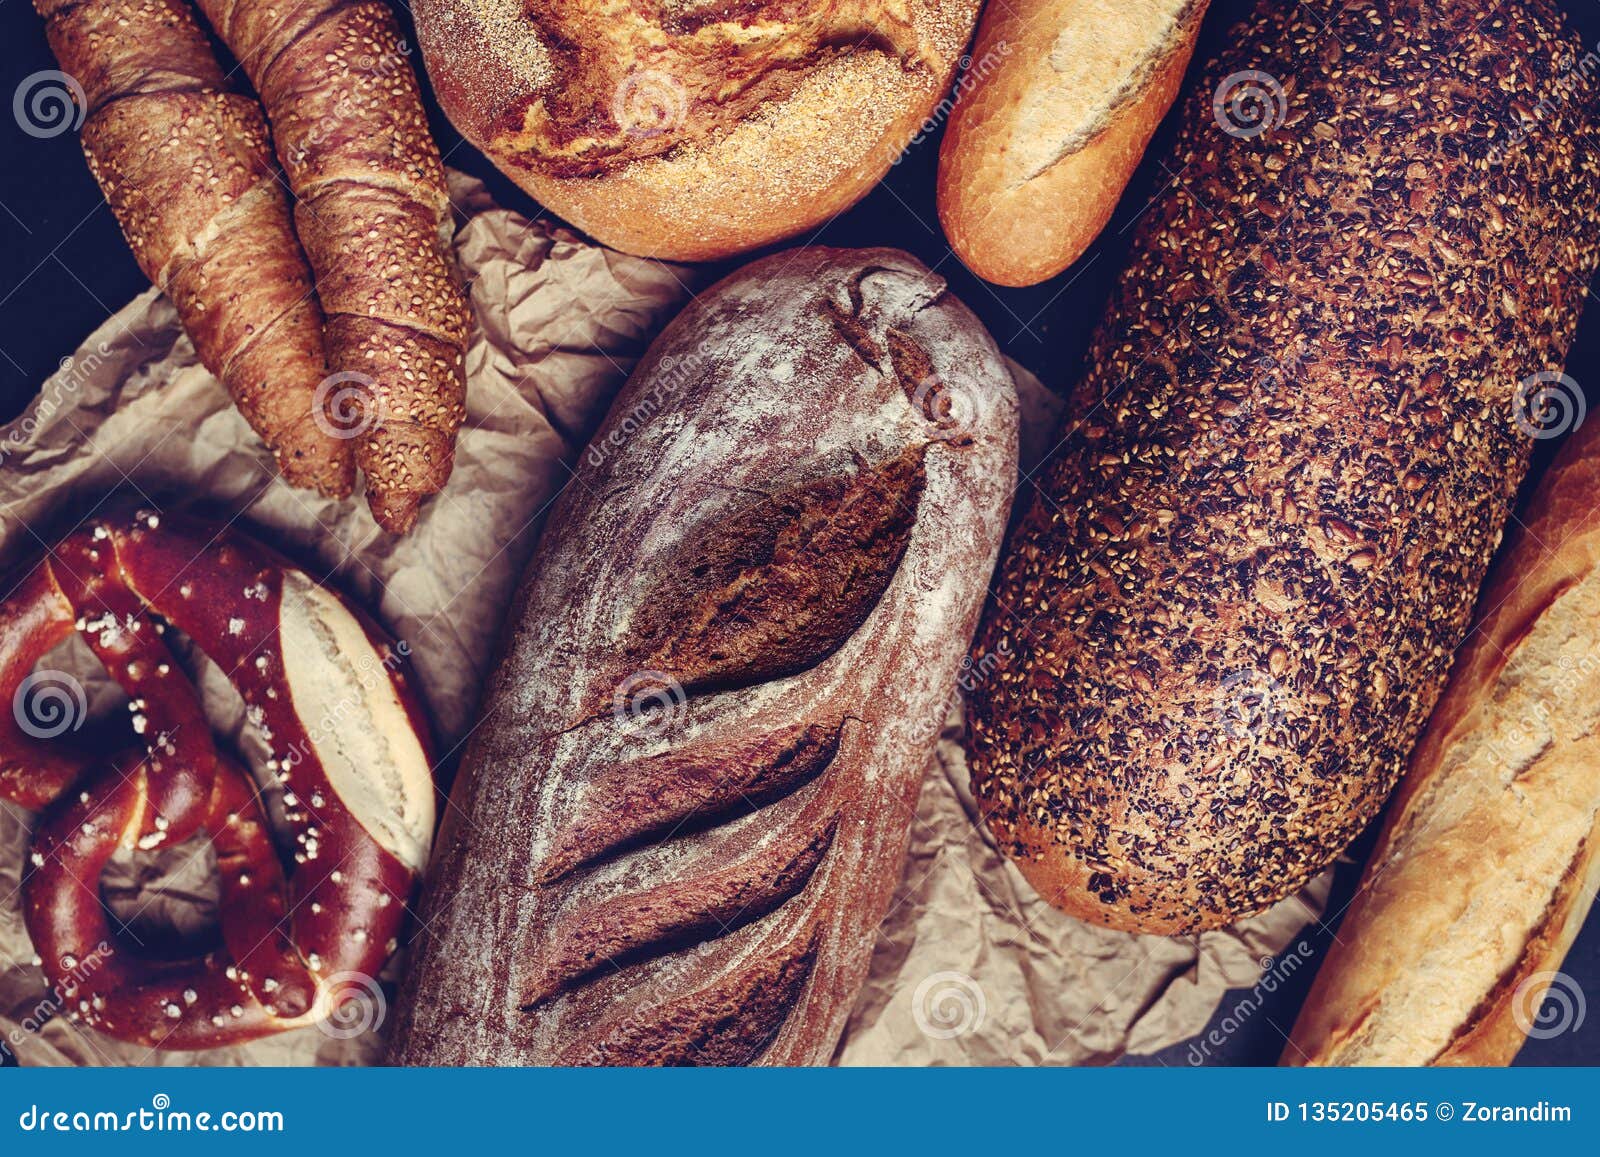 bavarian pretzel and traditionally made baked goods. - image